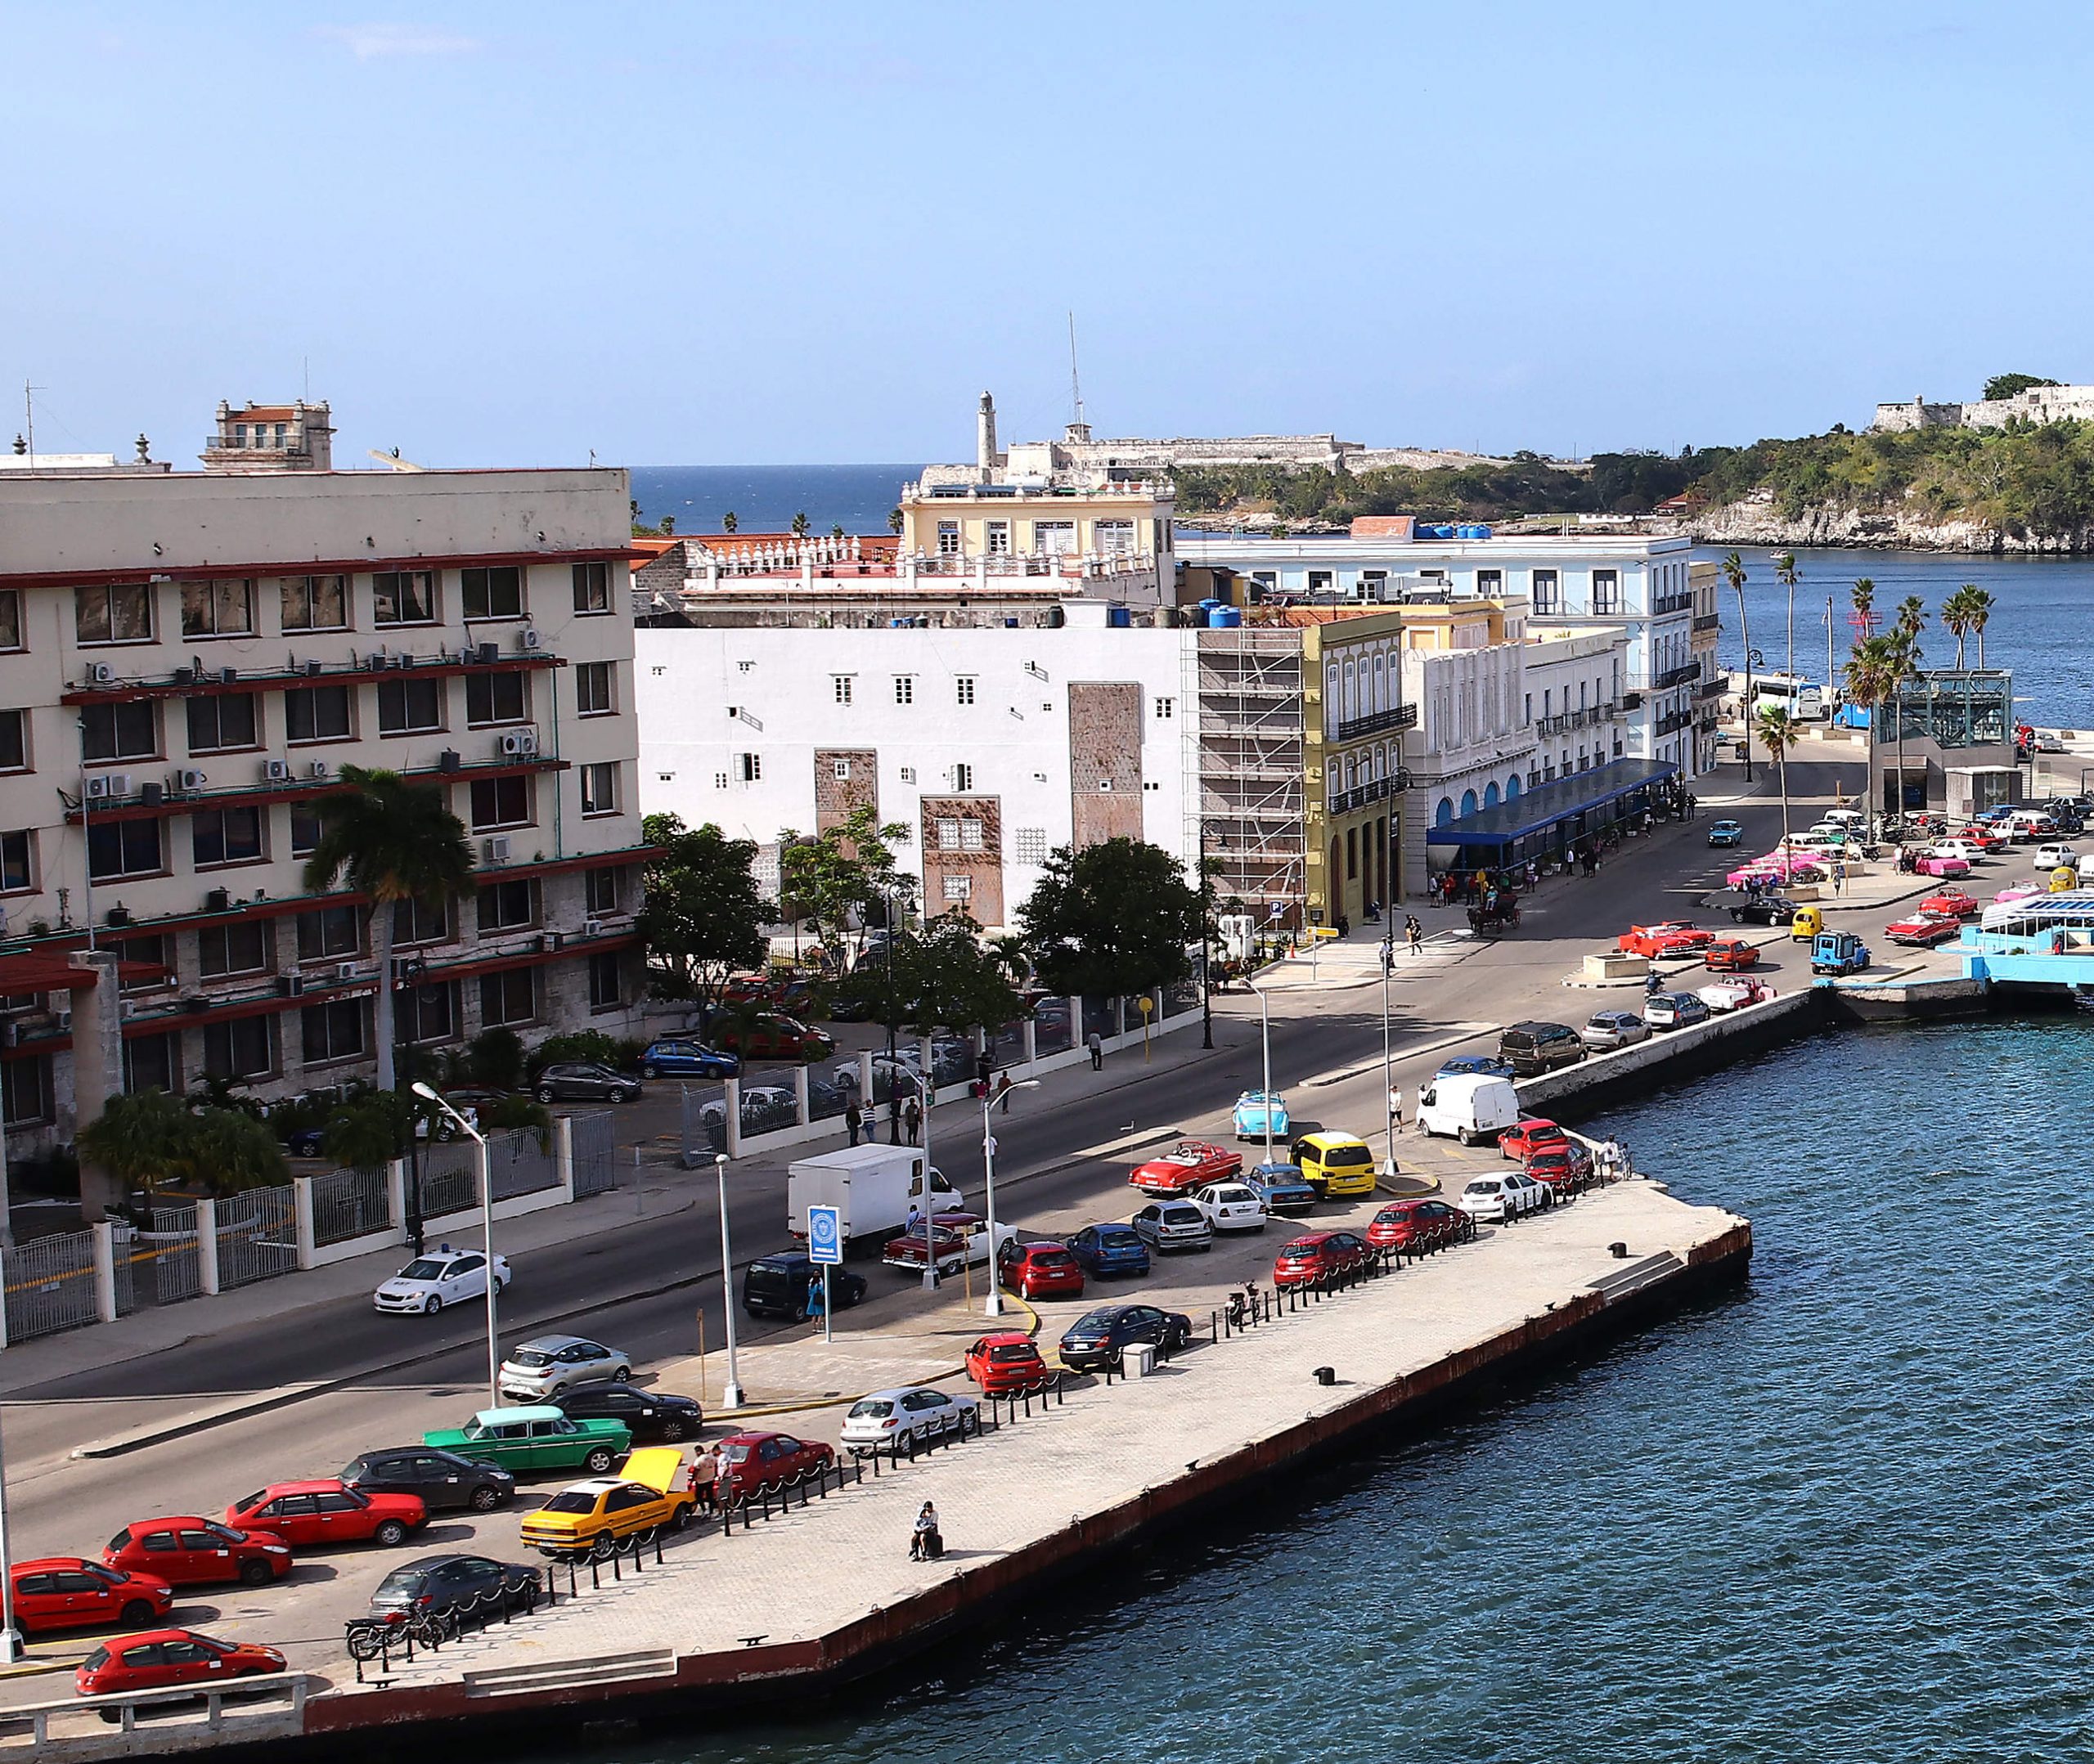 Detail from previous Havana Port from docked ship